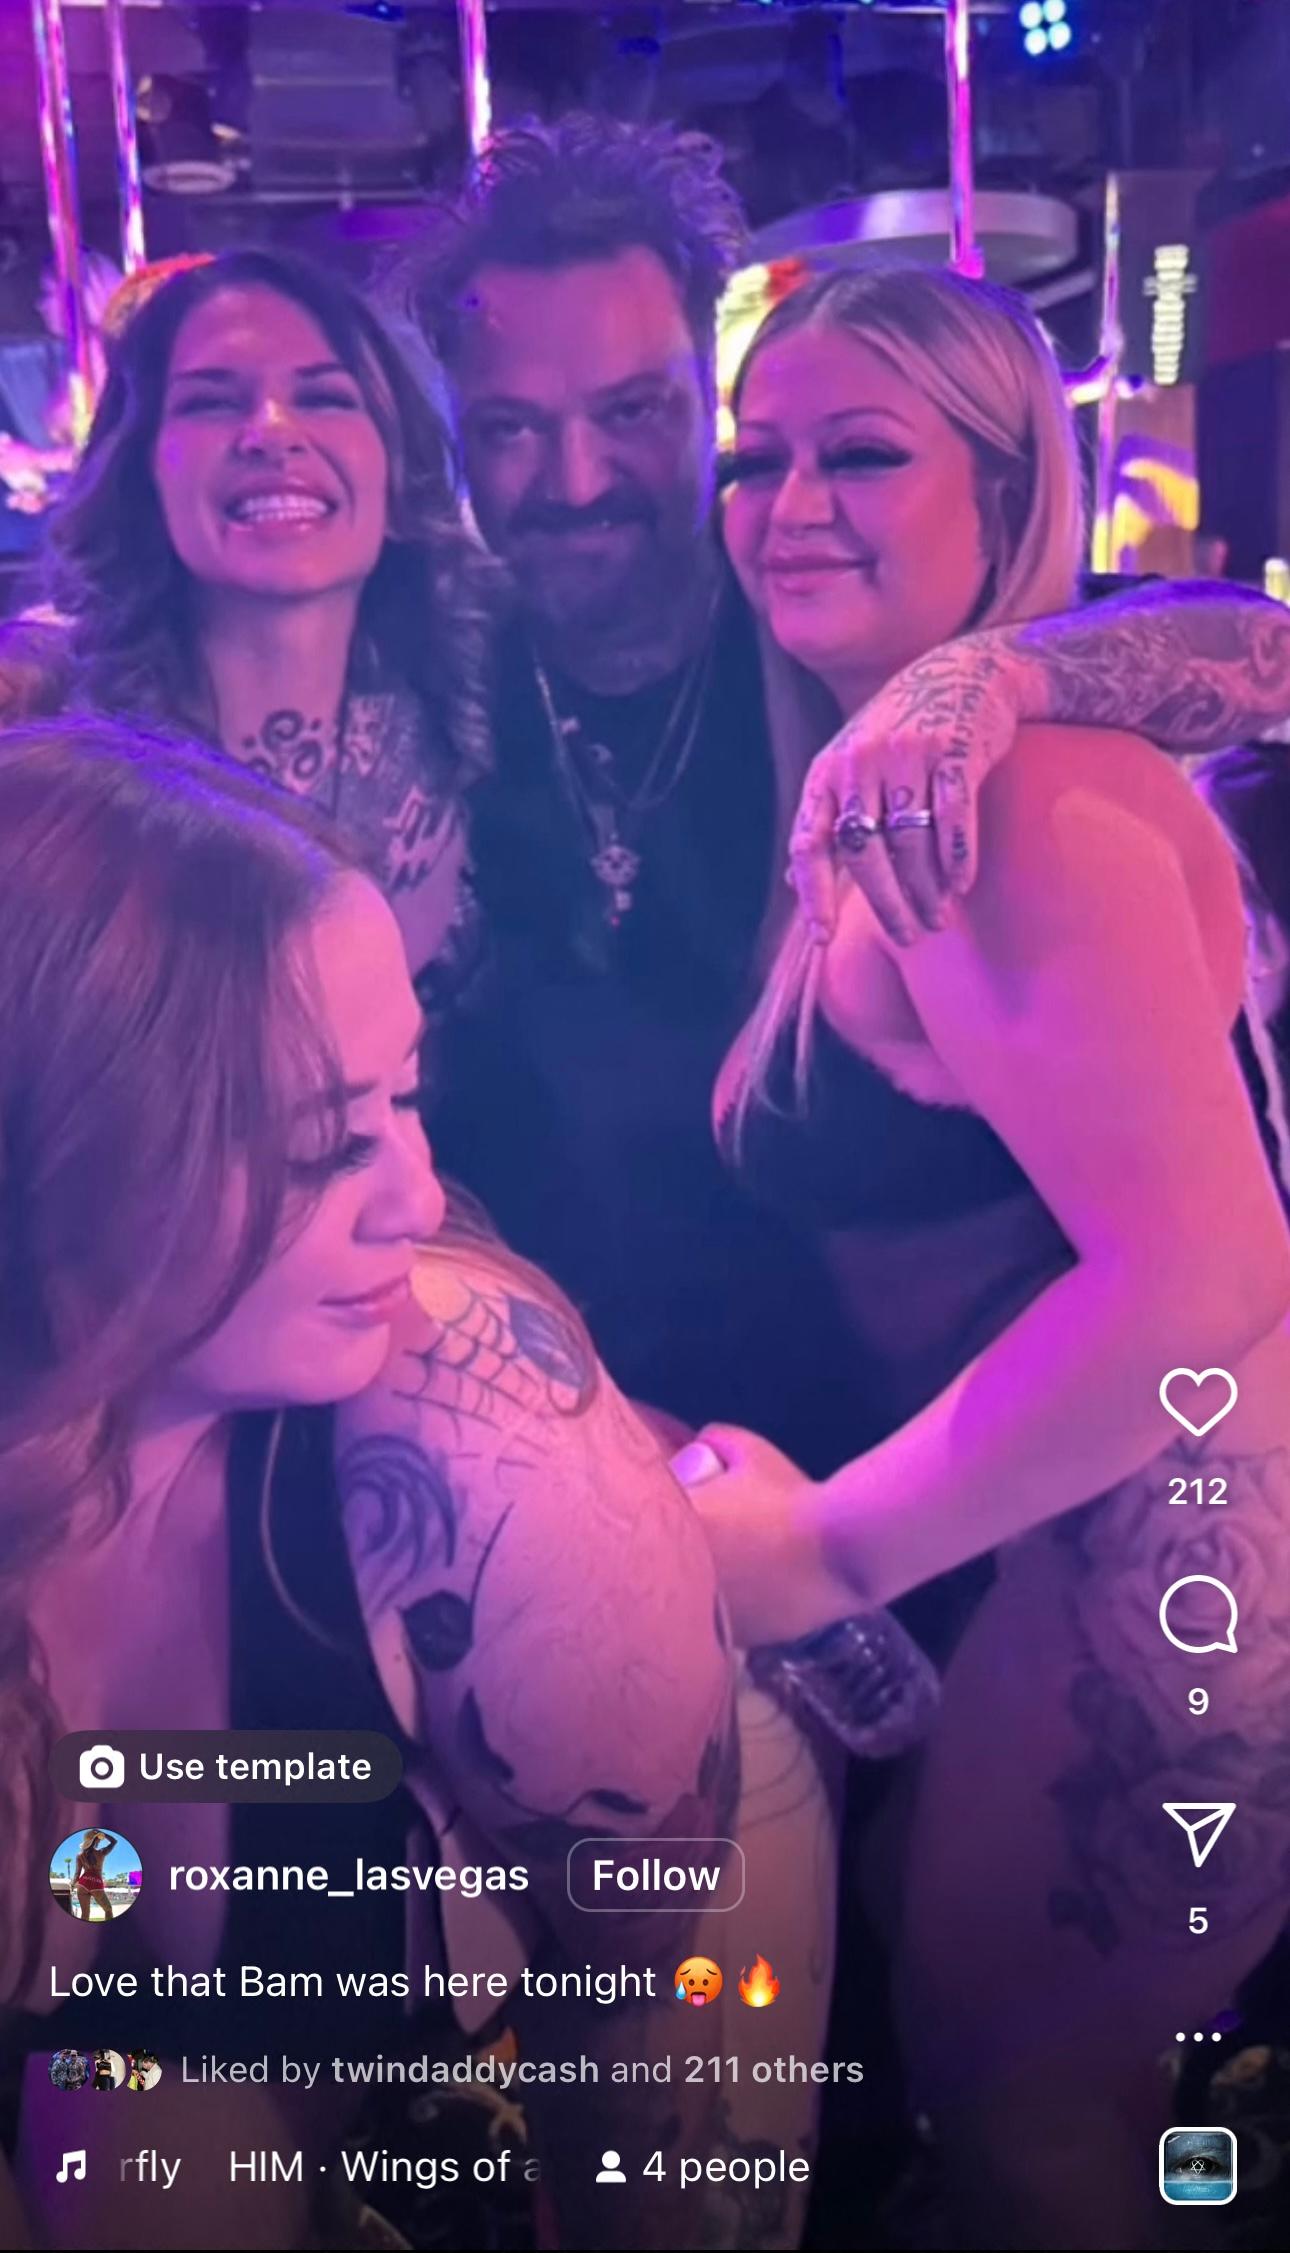 Jackass star Bam Margera spotted at Las Vegas strip club amid divorce filing woes